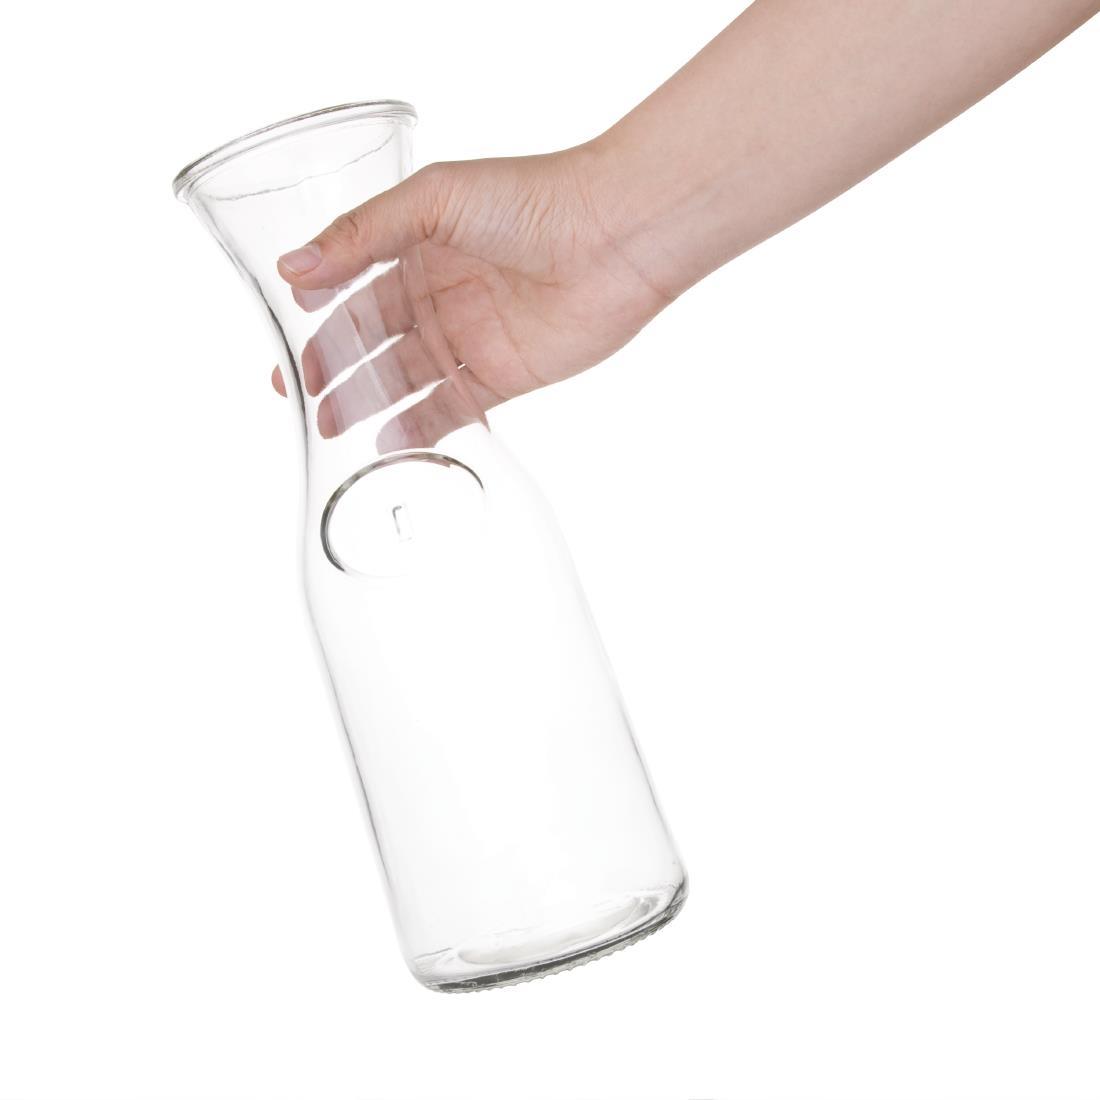 Olympia Glass Carafe 1Ltr (Pack of 6) - GG928  - 2